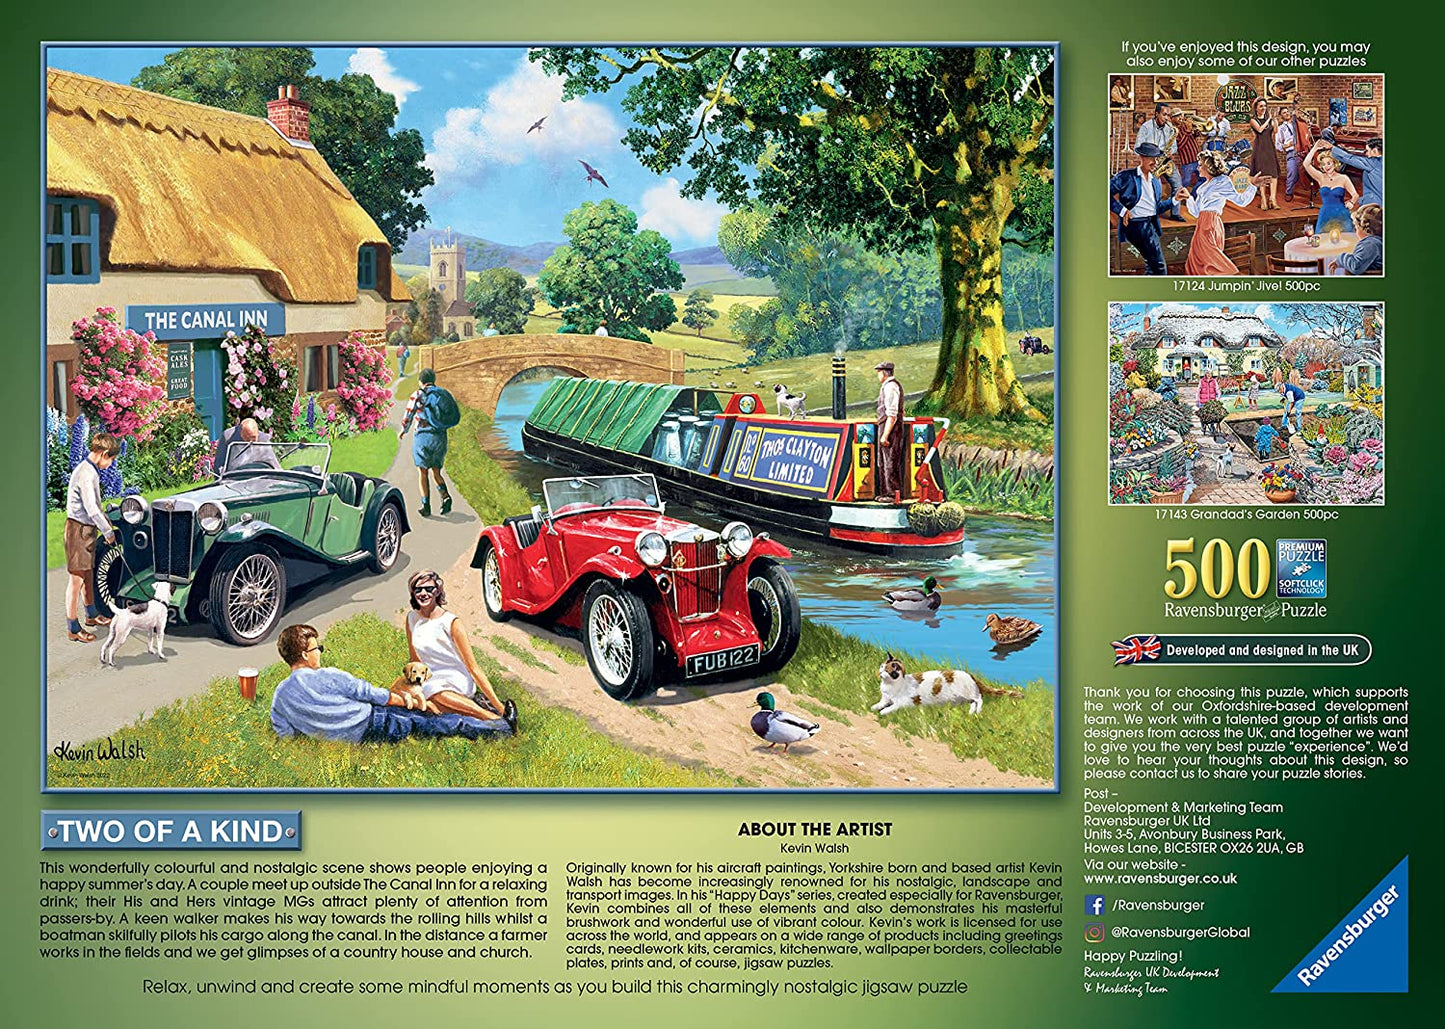 Ravensburger - Two of a Kind - 500 Piece Jigsaw Puzzle